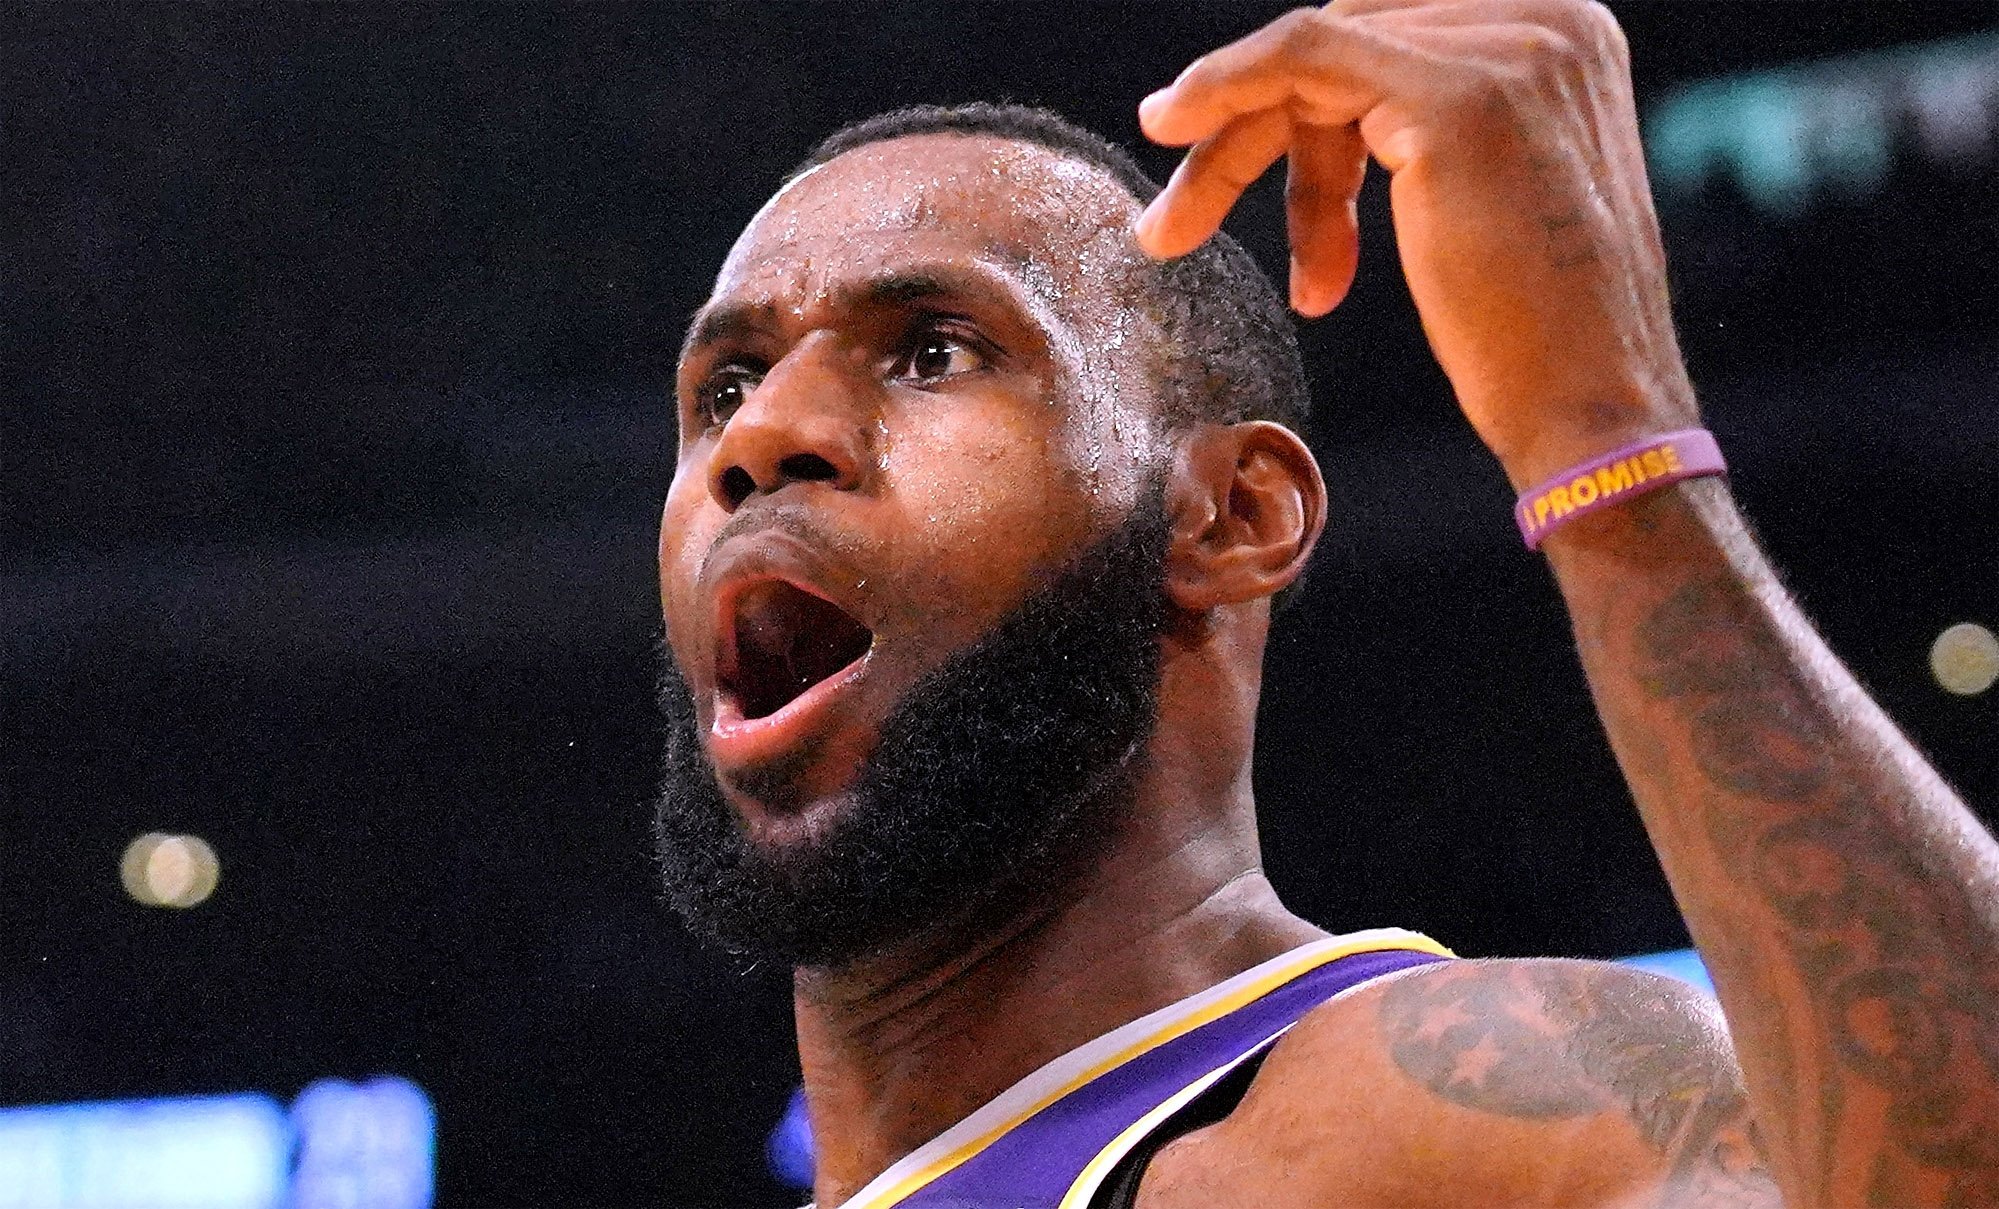 Fans laid into LeBron James for his latest on-court antic